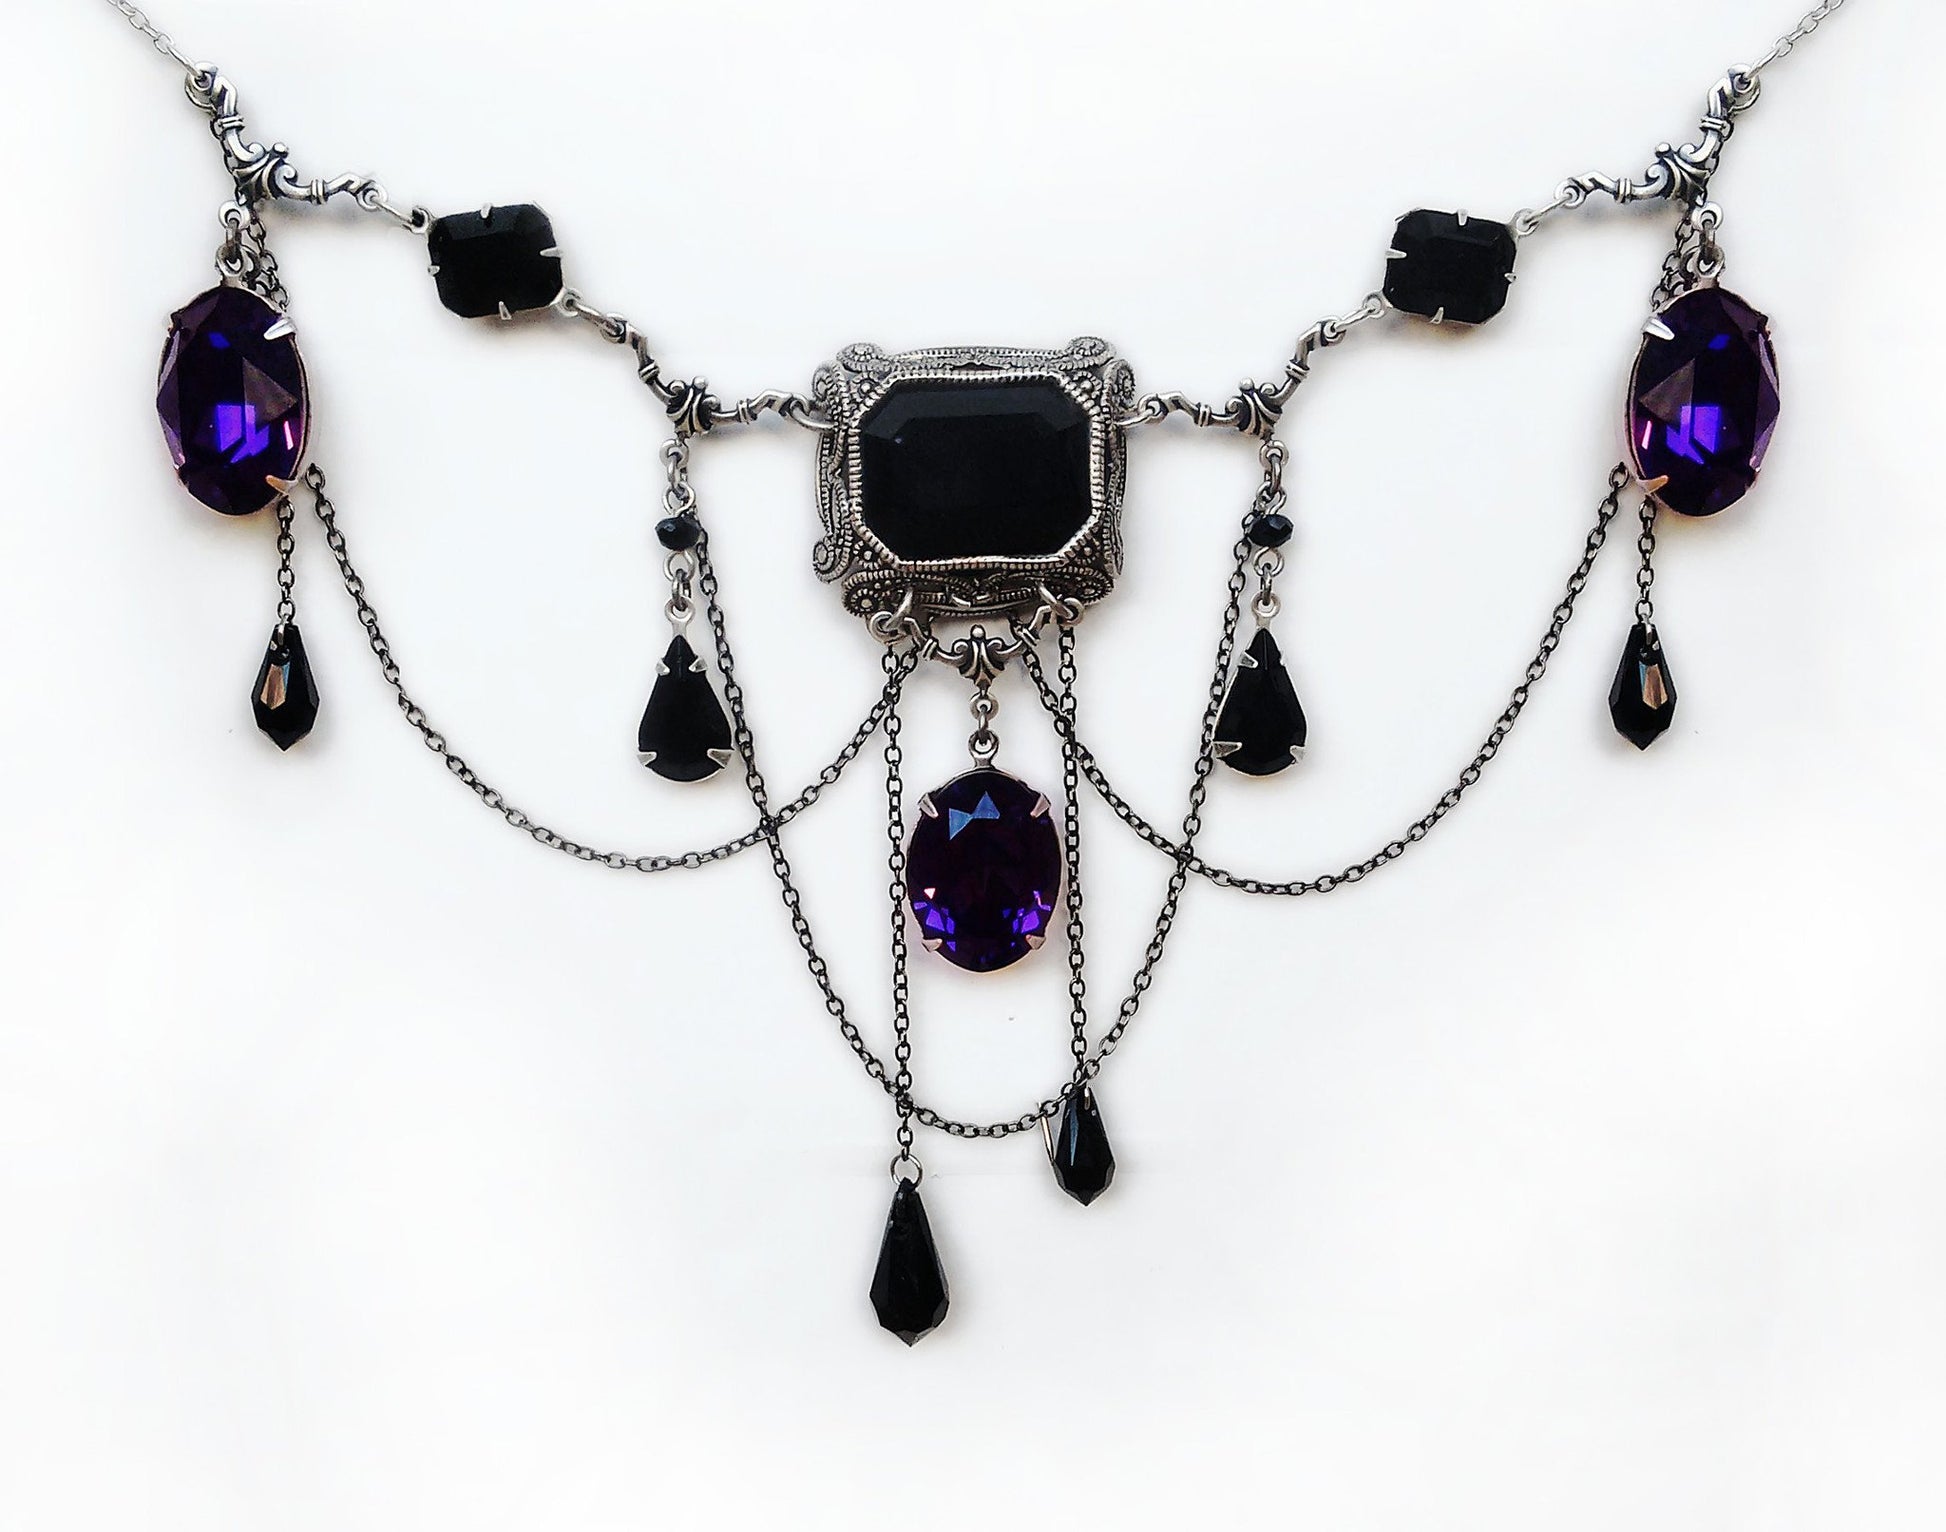 Black and Purple Gothic Necklace - Aranwen's Jewelry
 - 2